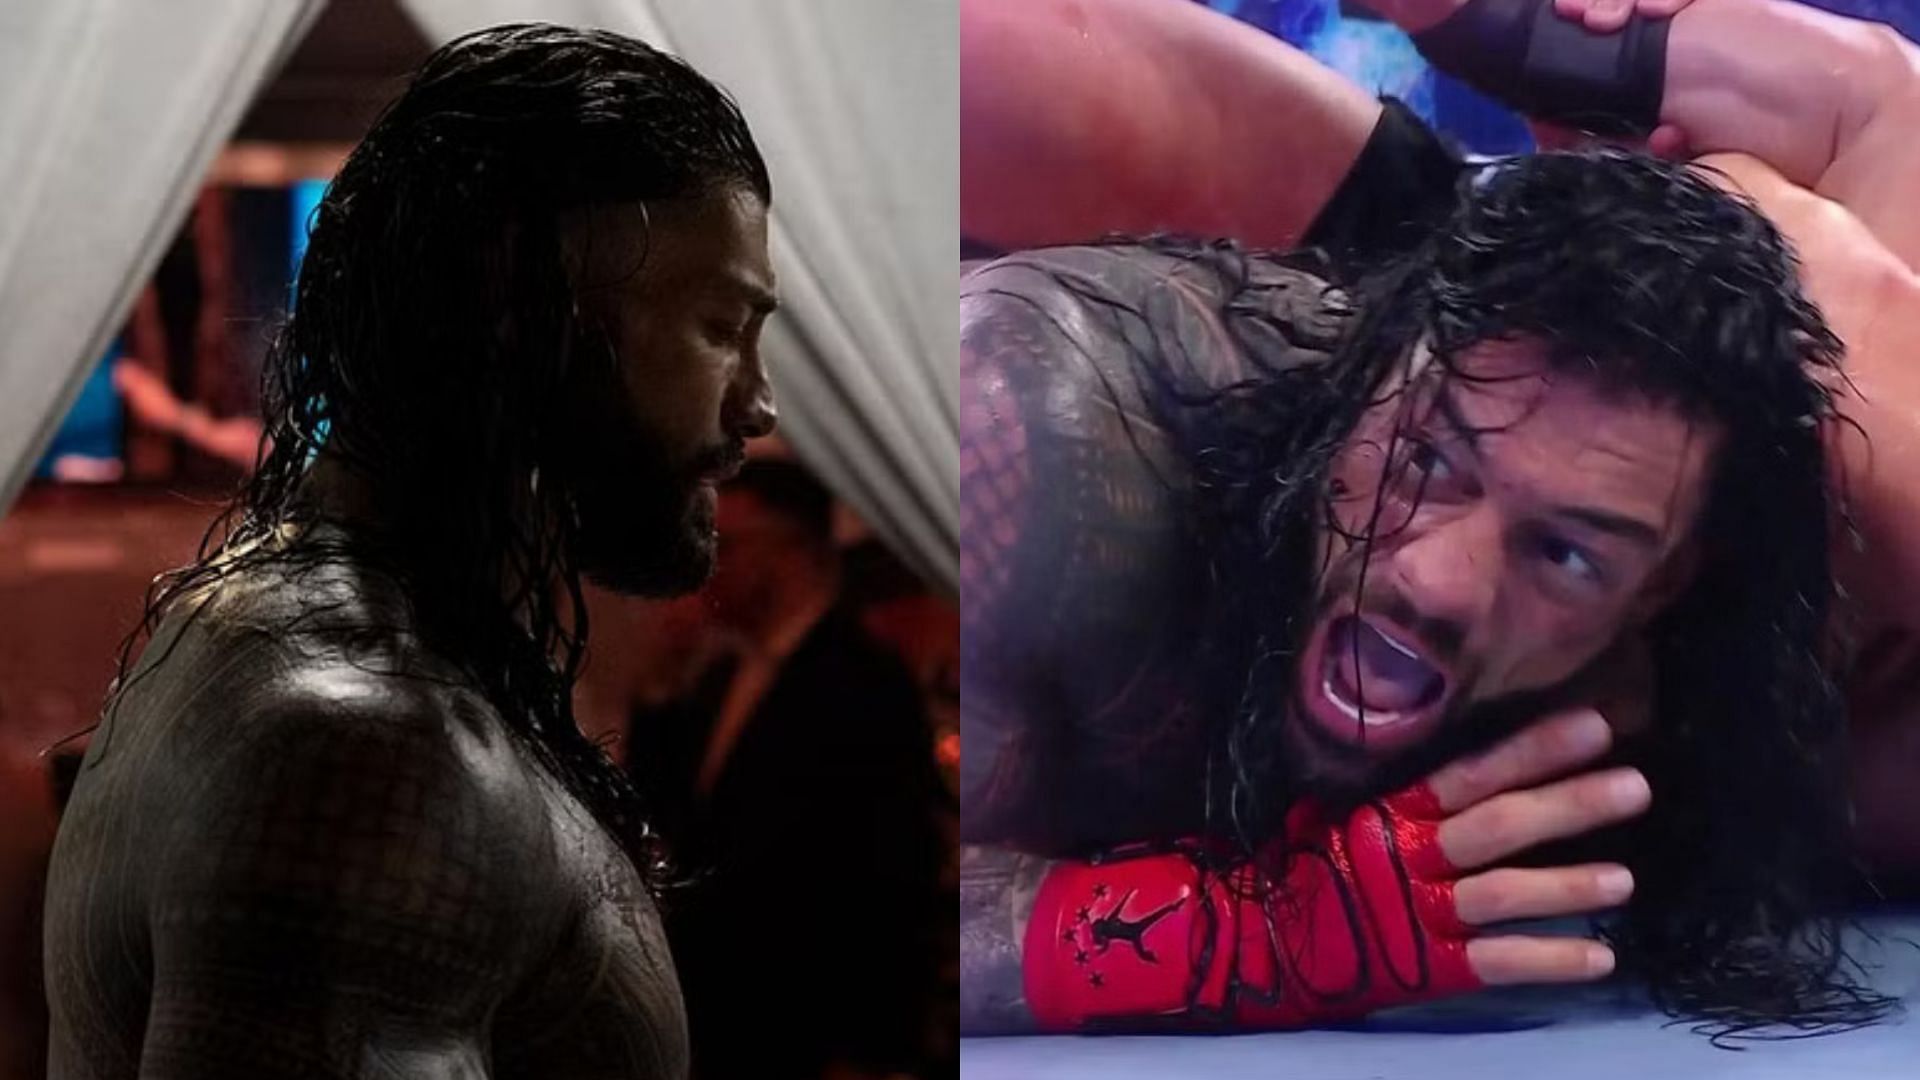 Reigns is scheduled to compete at Royal Rumble.